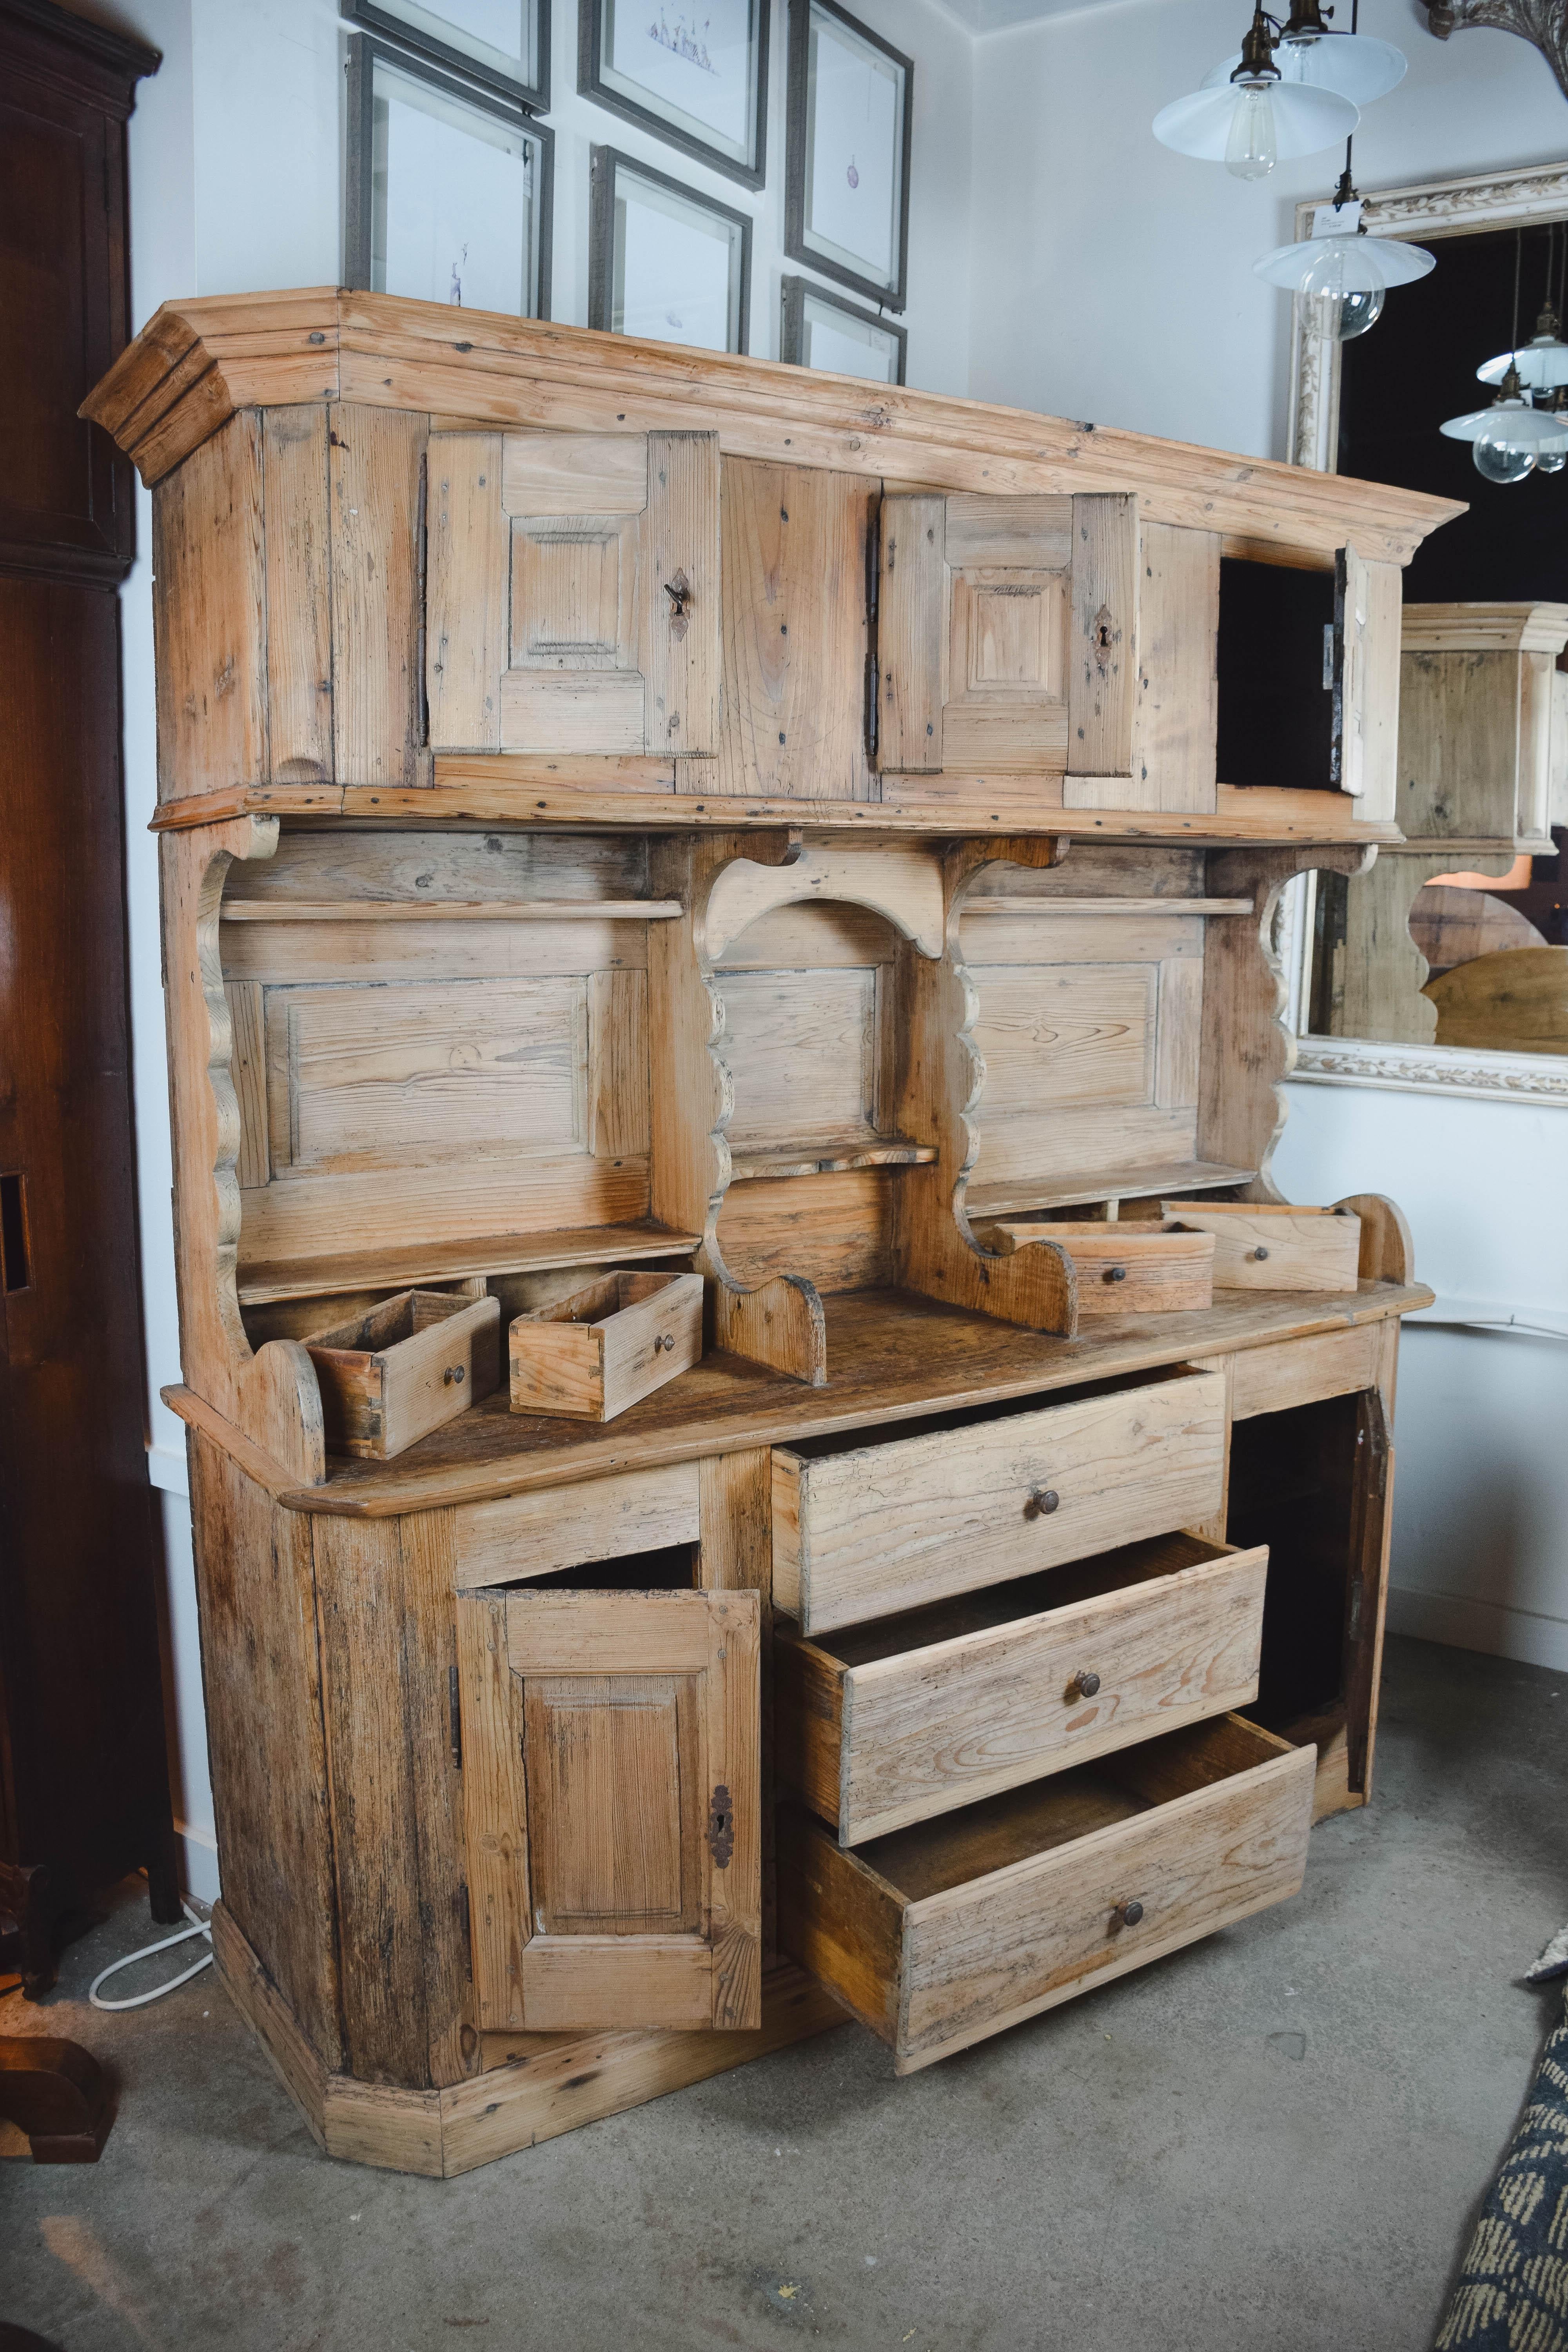 From England, this Classic country antique pine hutch has a beautiful aged patina. The cupboard has tons of storage space with three upper doors, each with a shelf inside along with a small exposed shelf below, four small drawers above the serving